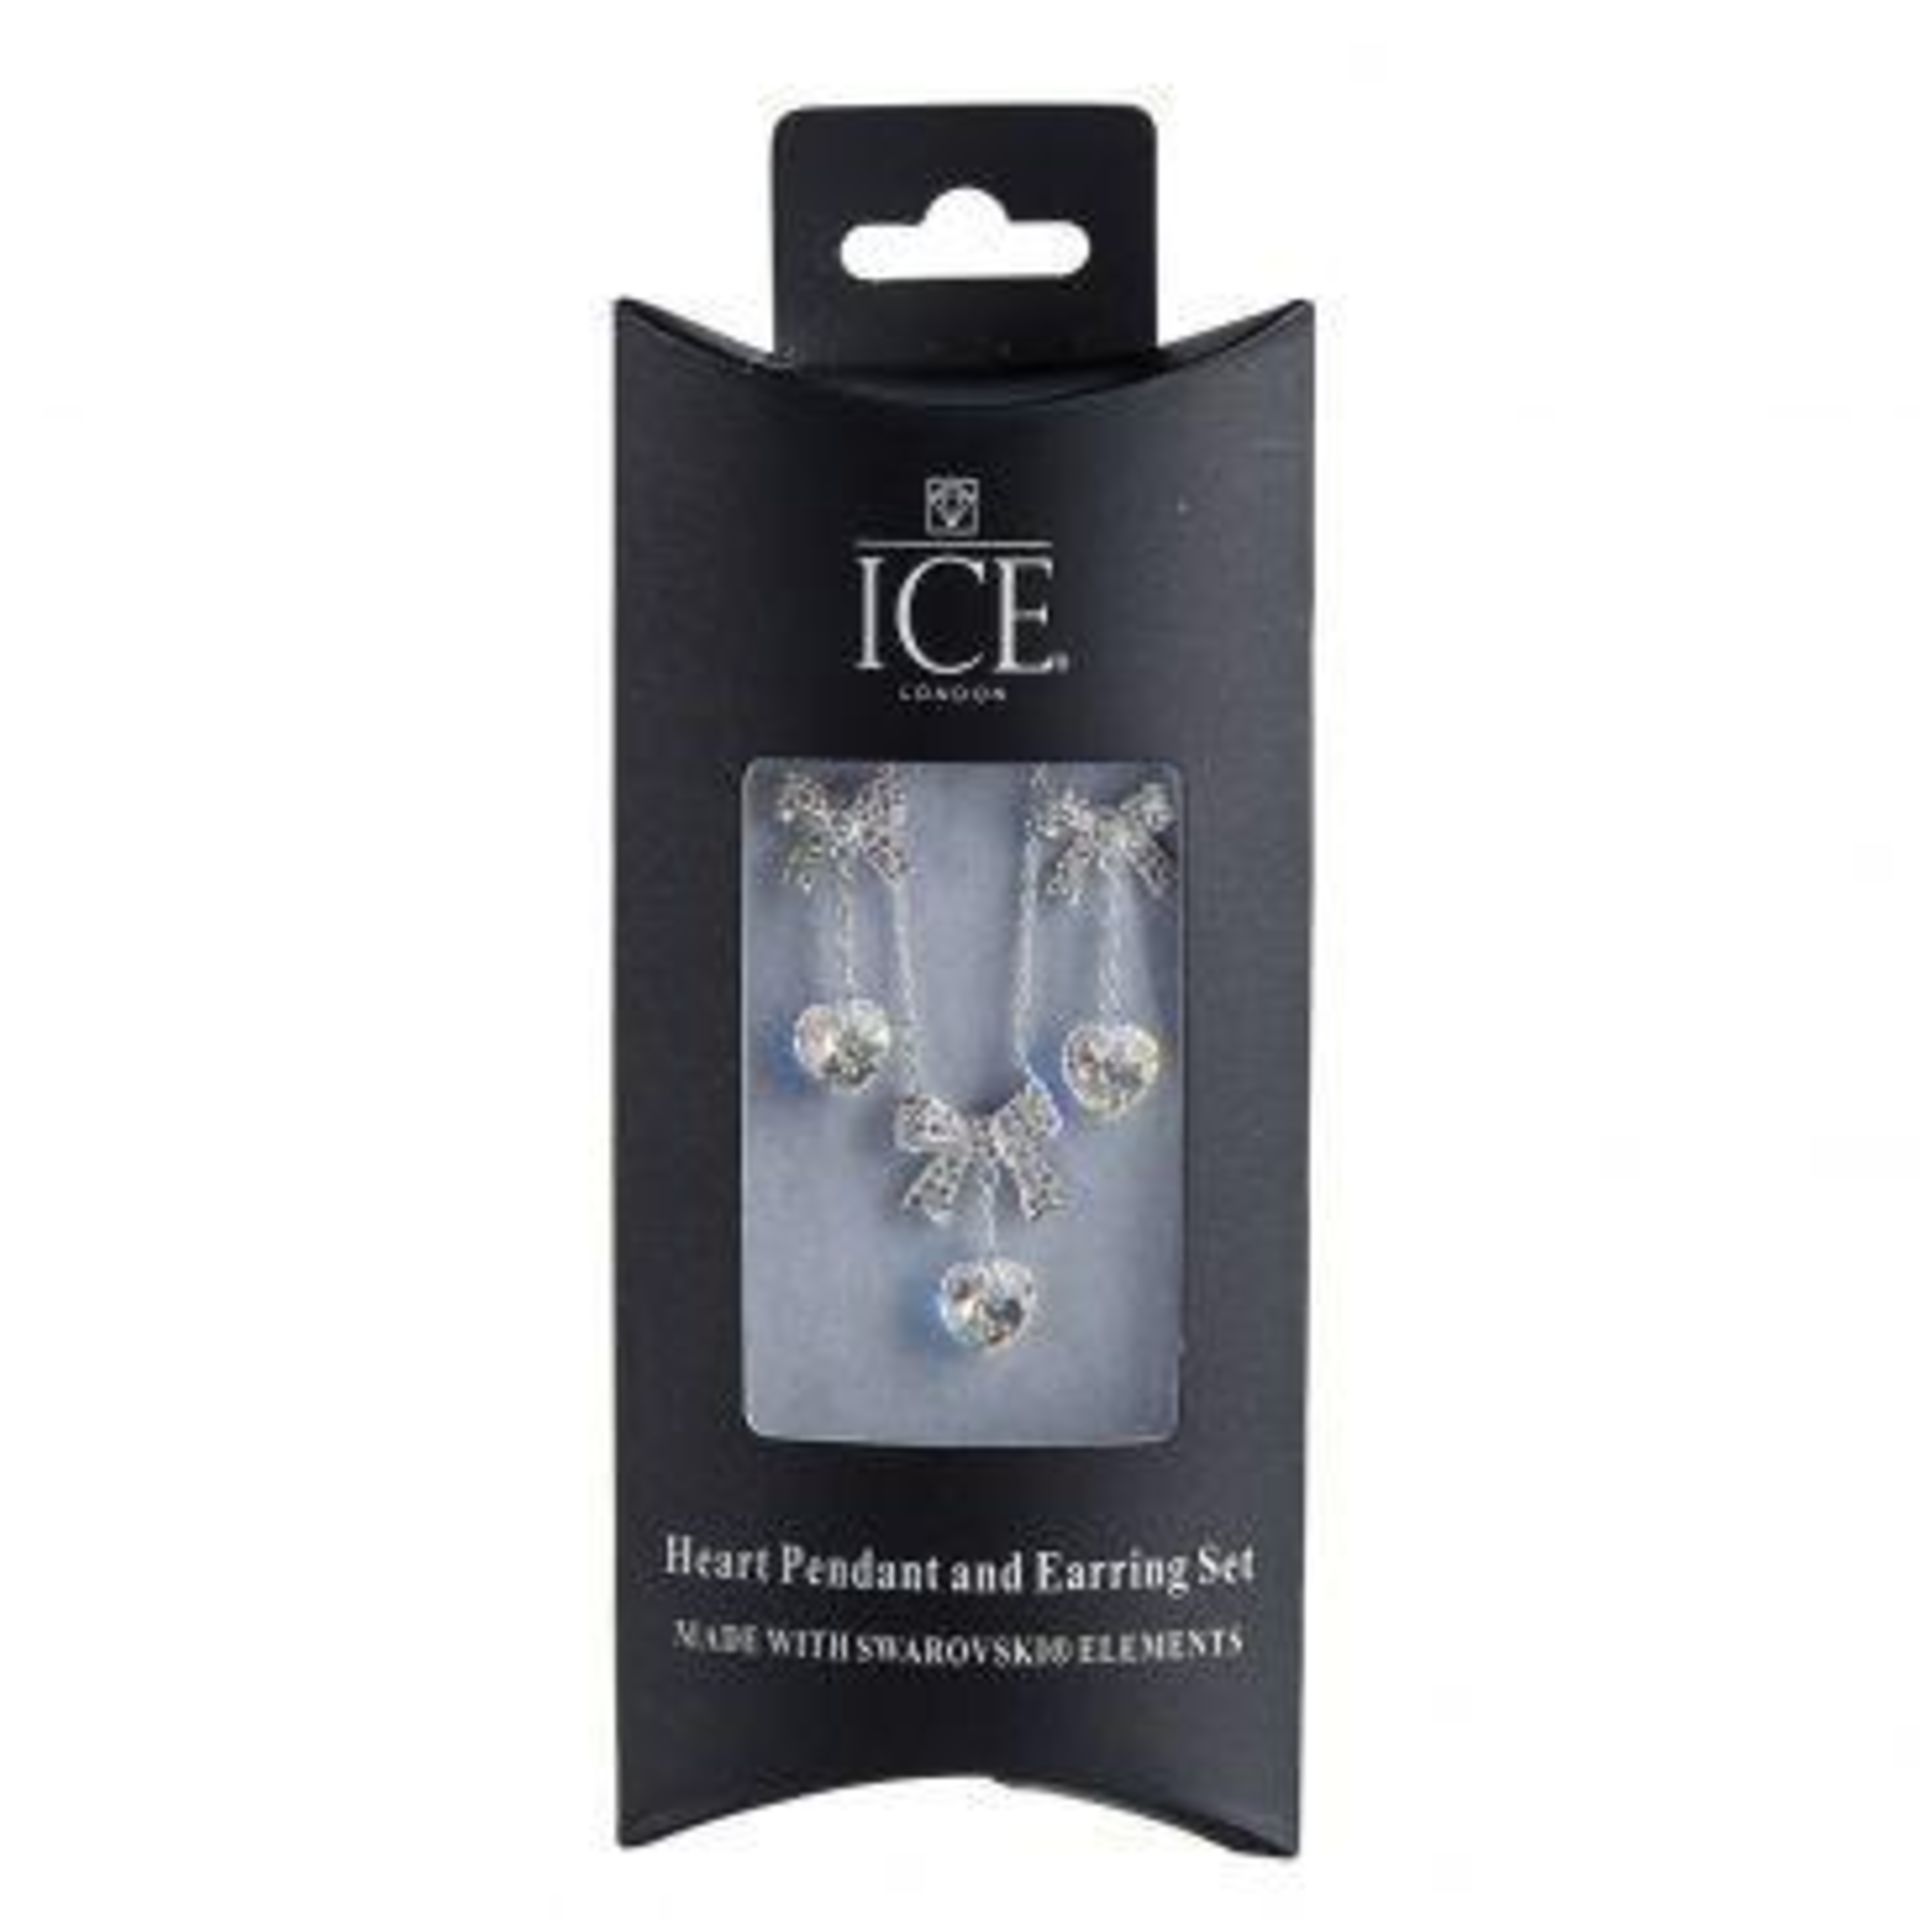 10 x HEART PENDANT AND EARRING SETS By ICE London - EGJ-9900 - Silver-tone Curb Chain Adorned With - Image 2 of 2